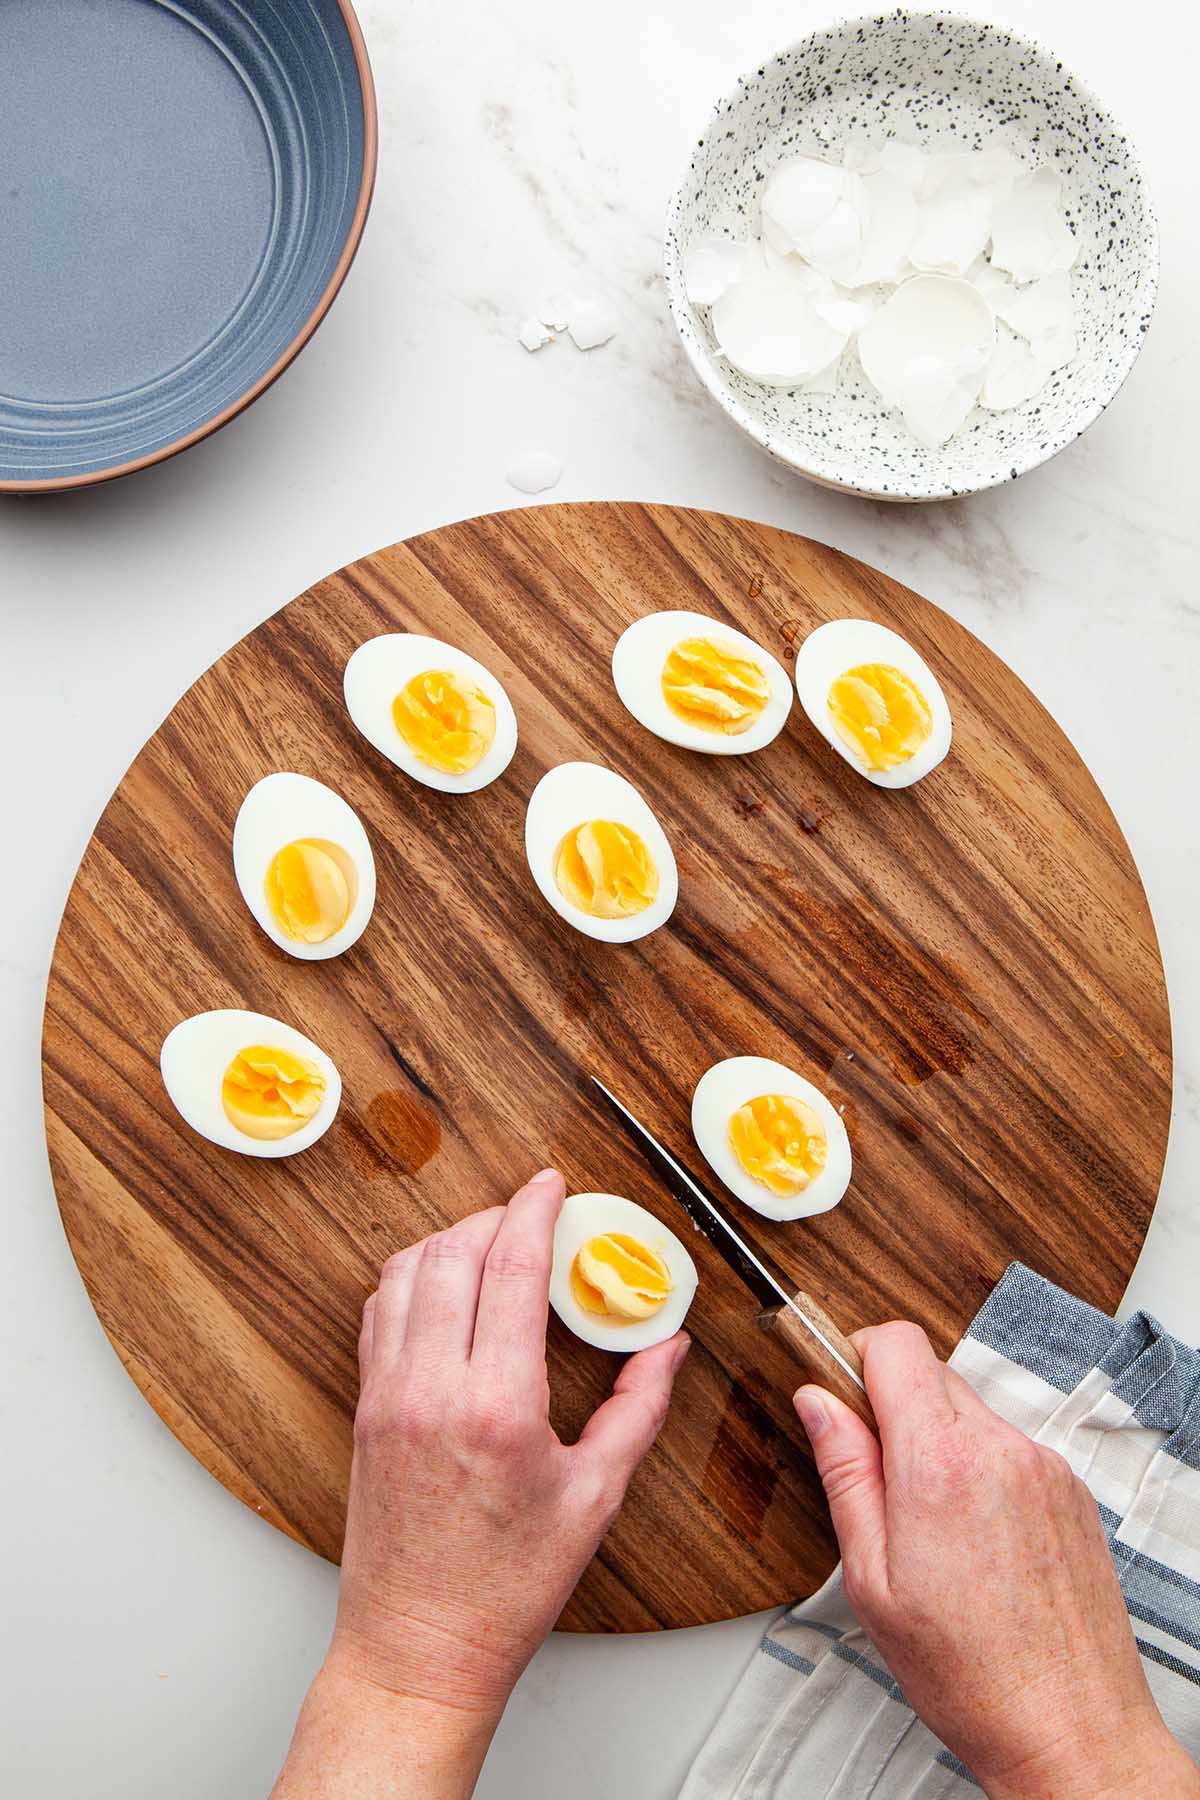 Hands slicing through a hard boiled egg with a paring knife on a wooden cutting board.